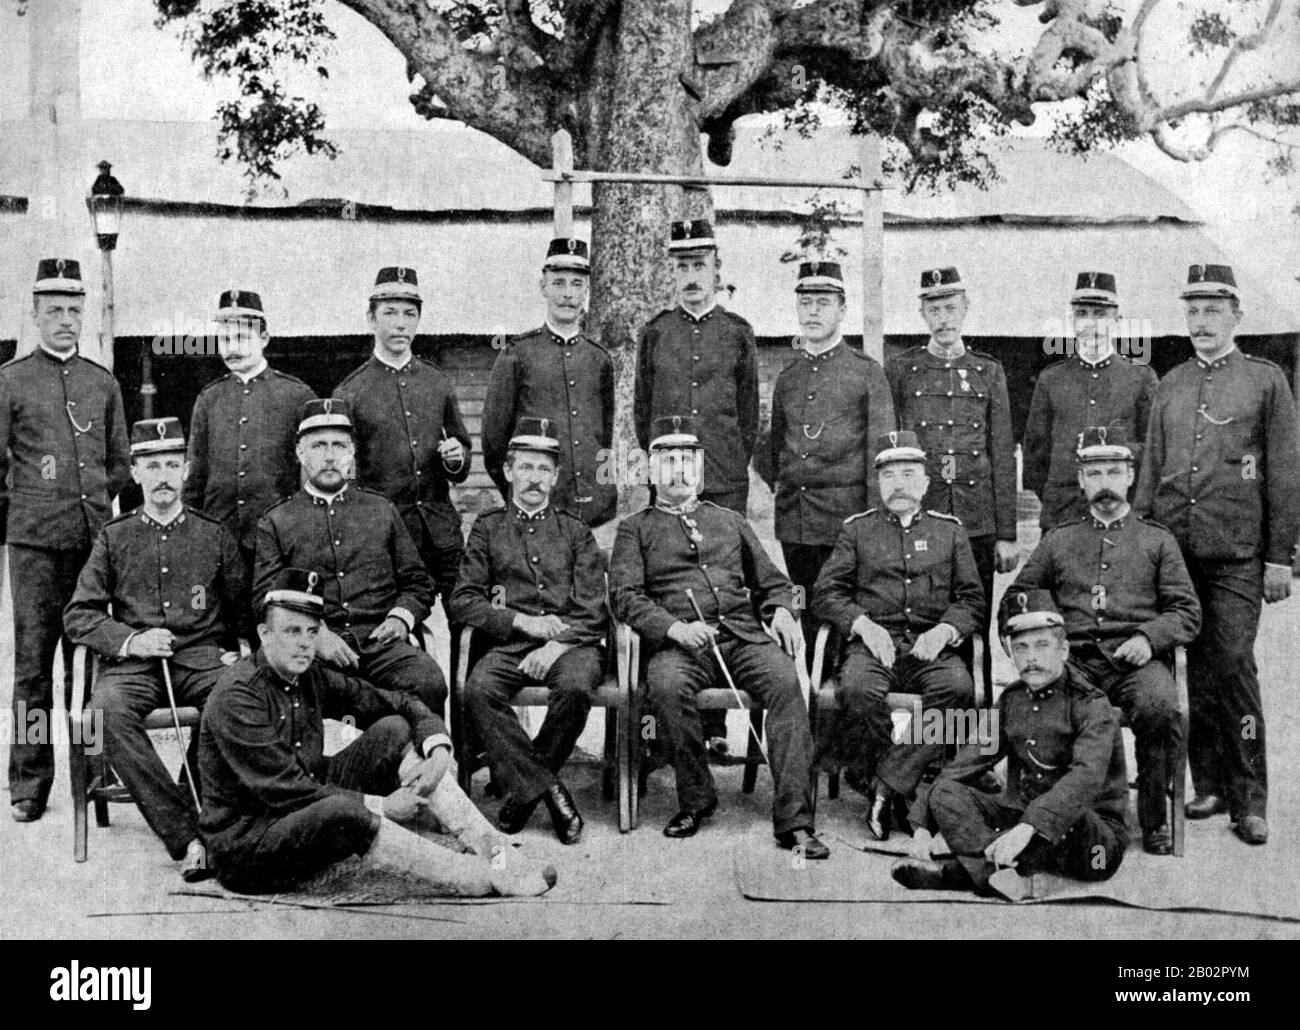 The Aceh War, also known as the Dutch War or the Infidel War (1873–1914), was an armed military conflict between the Sultanate of Aceh and the Netherlands which was triggered by discussions between representatives of Aceh and the United Kingdom in Singapore during early 1873.  The war was part of a series of conflicts in the late 19th century that consolidated Dutch rule over modern-day Indonesia. Stock Photo